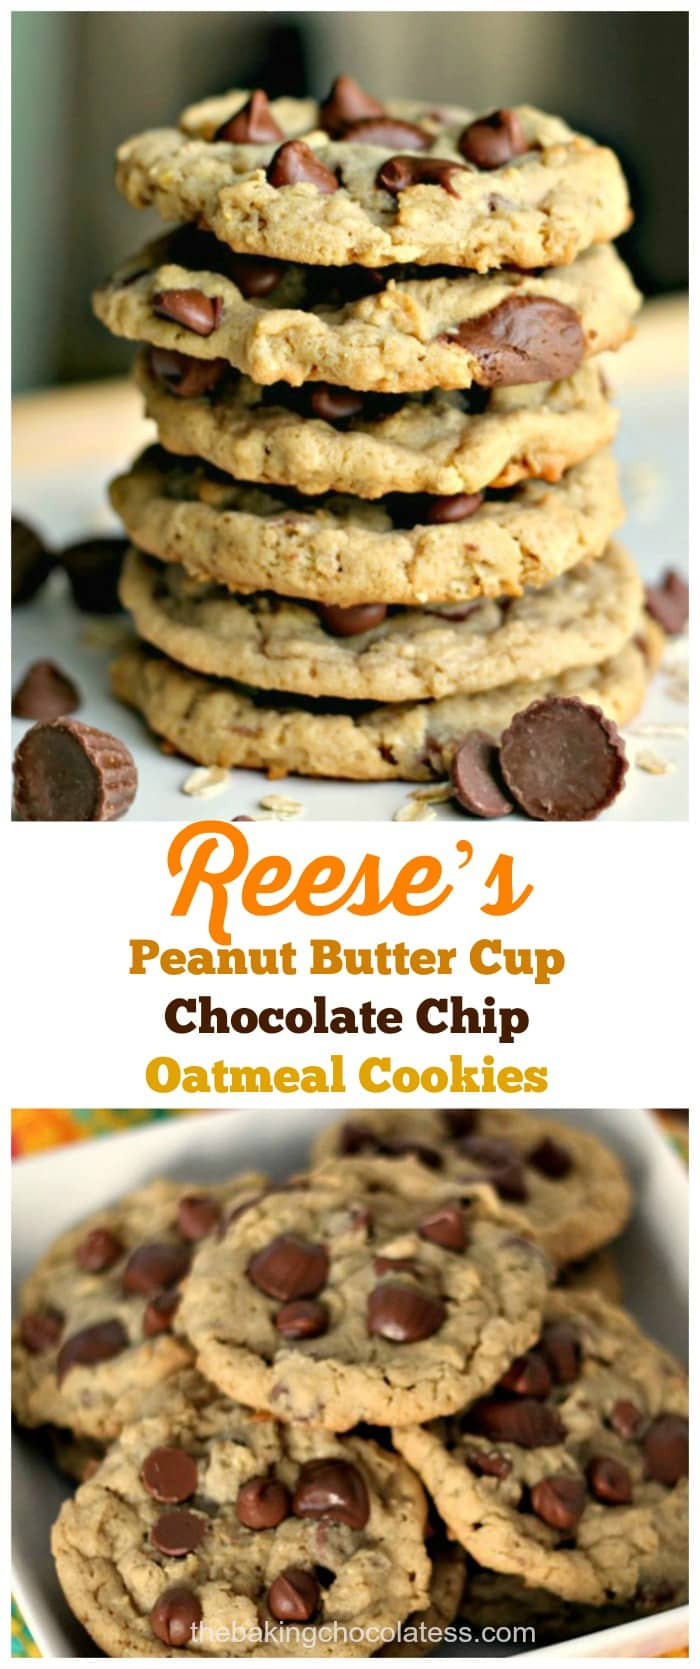 Reese Peanut Butter Cup Cookies
 Reese’s Peanut Butter Cup Chocolate Chip Oatmeal Cookies